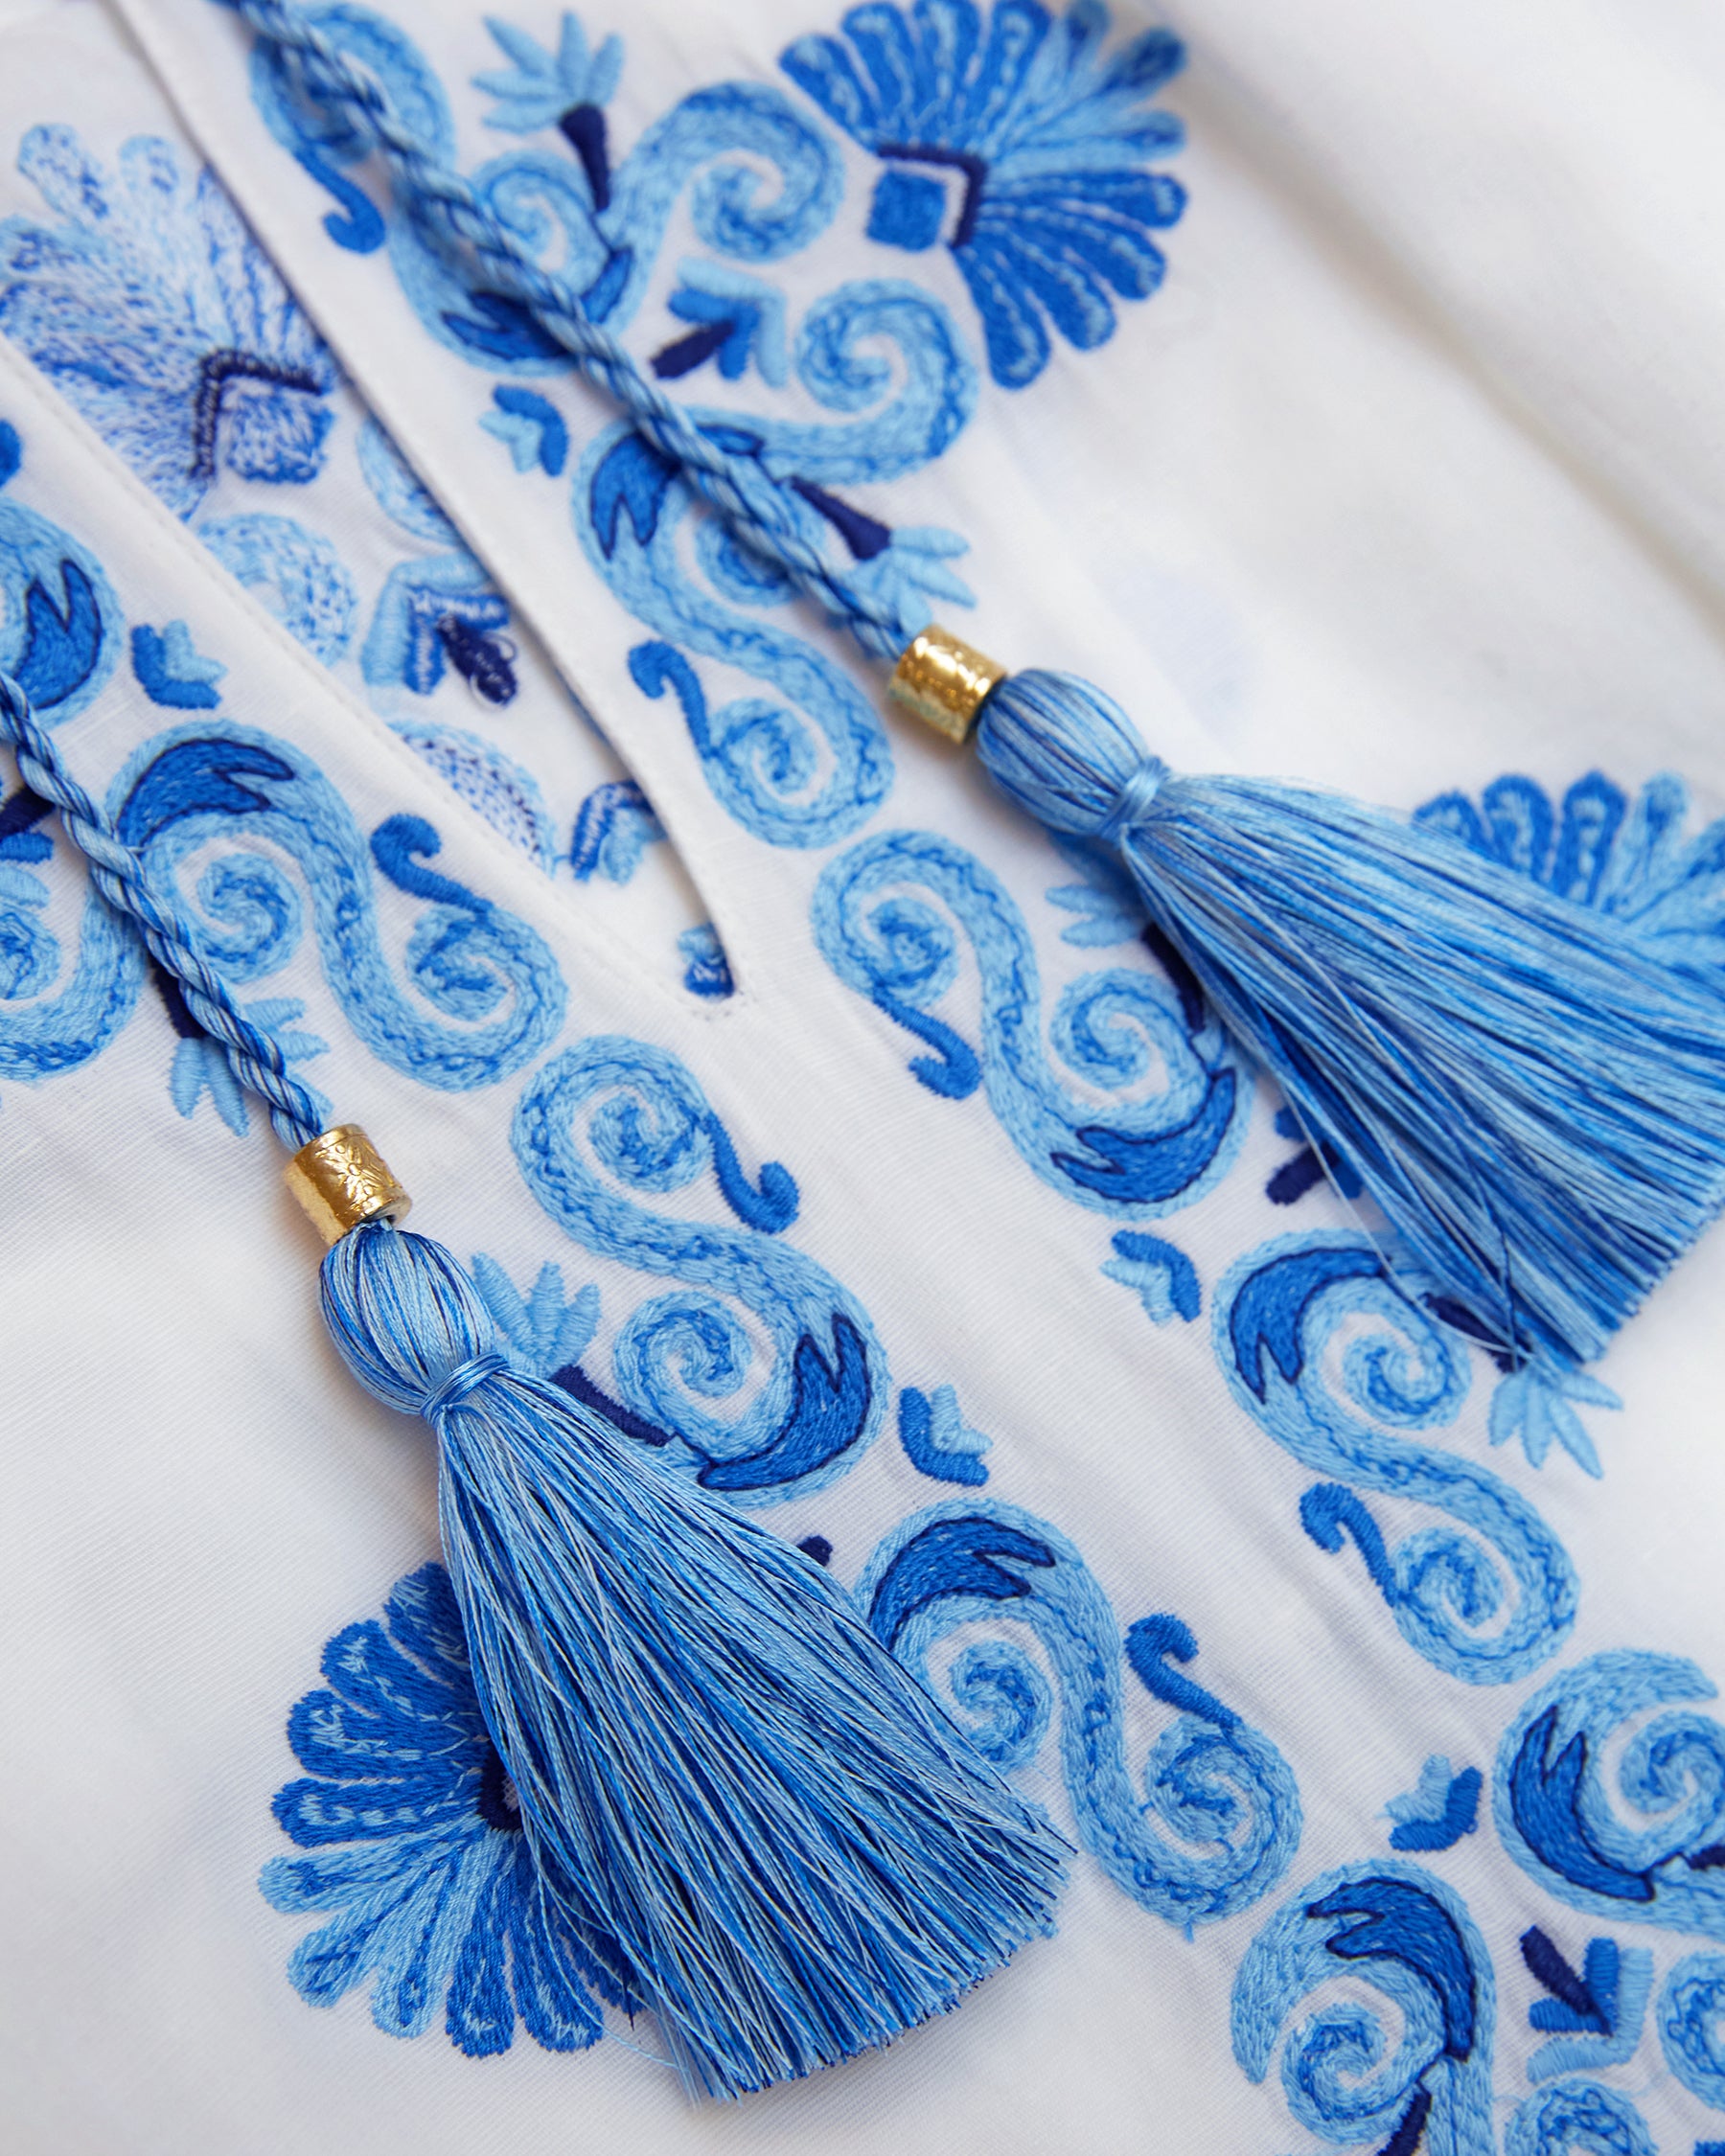 Menorca Peasant Blouse and Grecian Motif Embroidery-Detail of embroidery